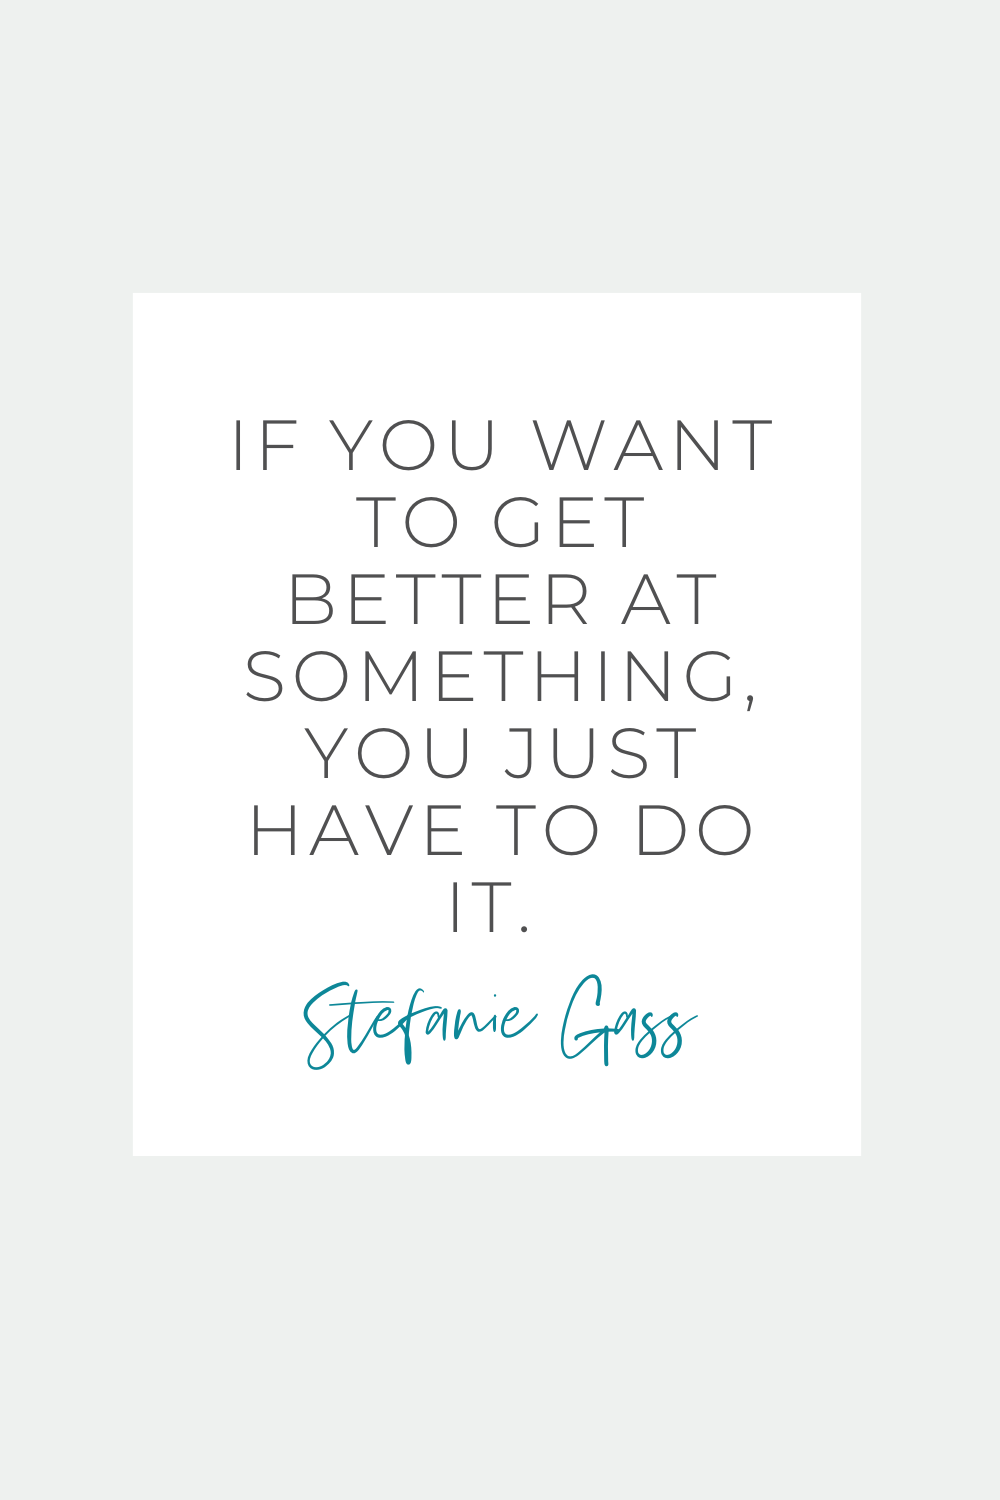 Image text reads:  If you want to get better at something, you just have to do it.  Stefanie Gass